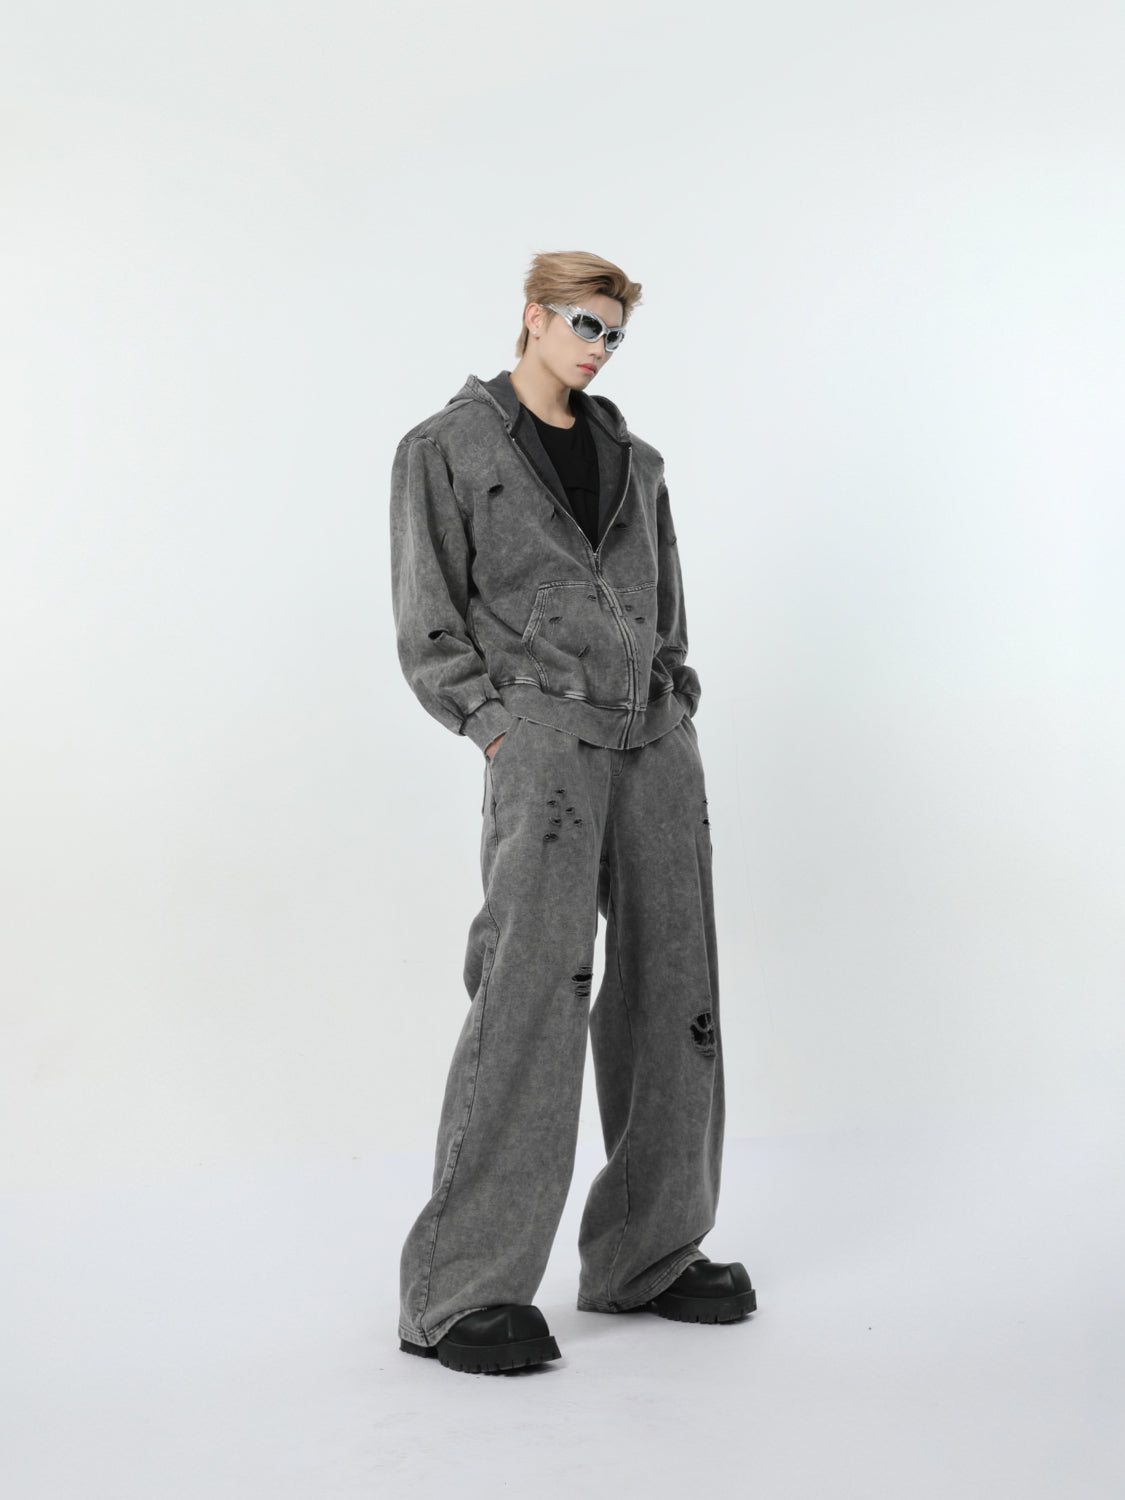 【24s March.】Destroyed Washed Distressed Hooded Cardigan Baggy Pants Suit